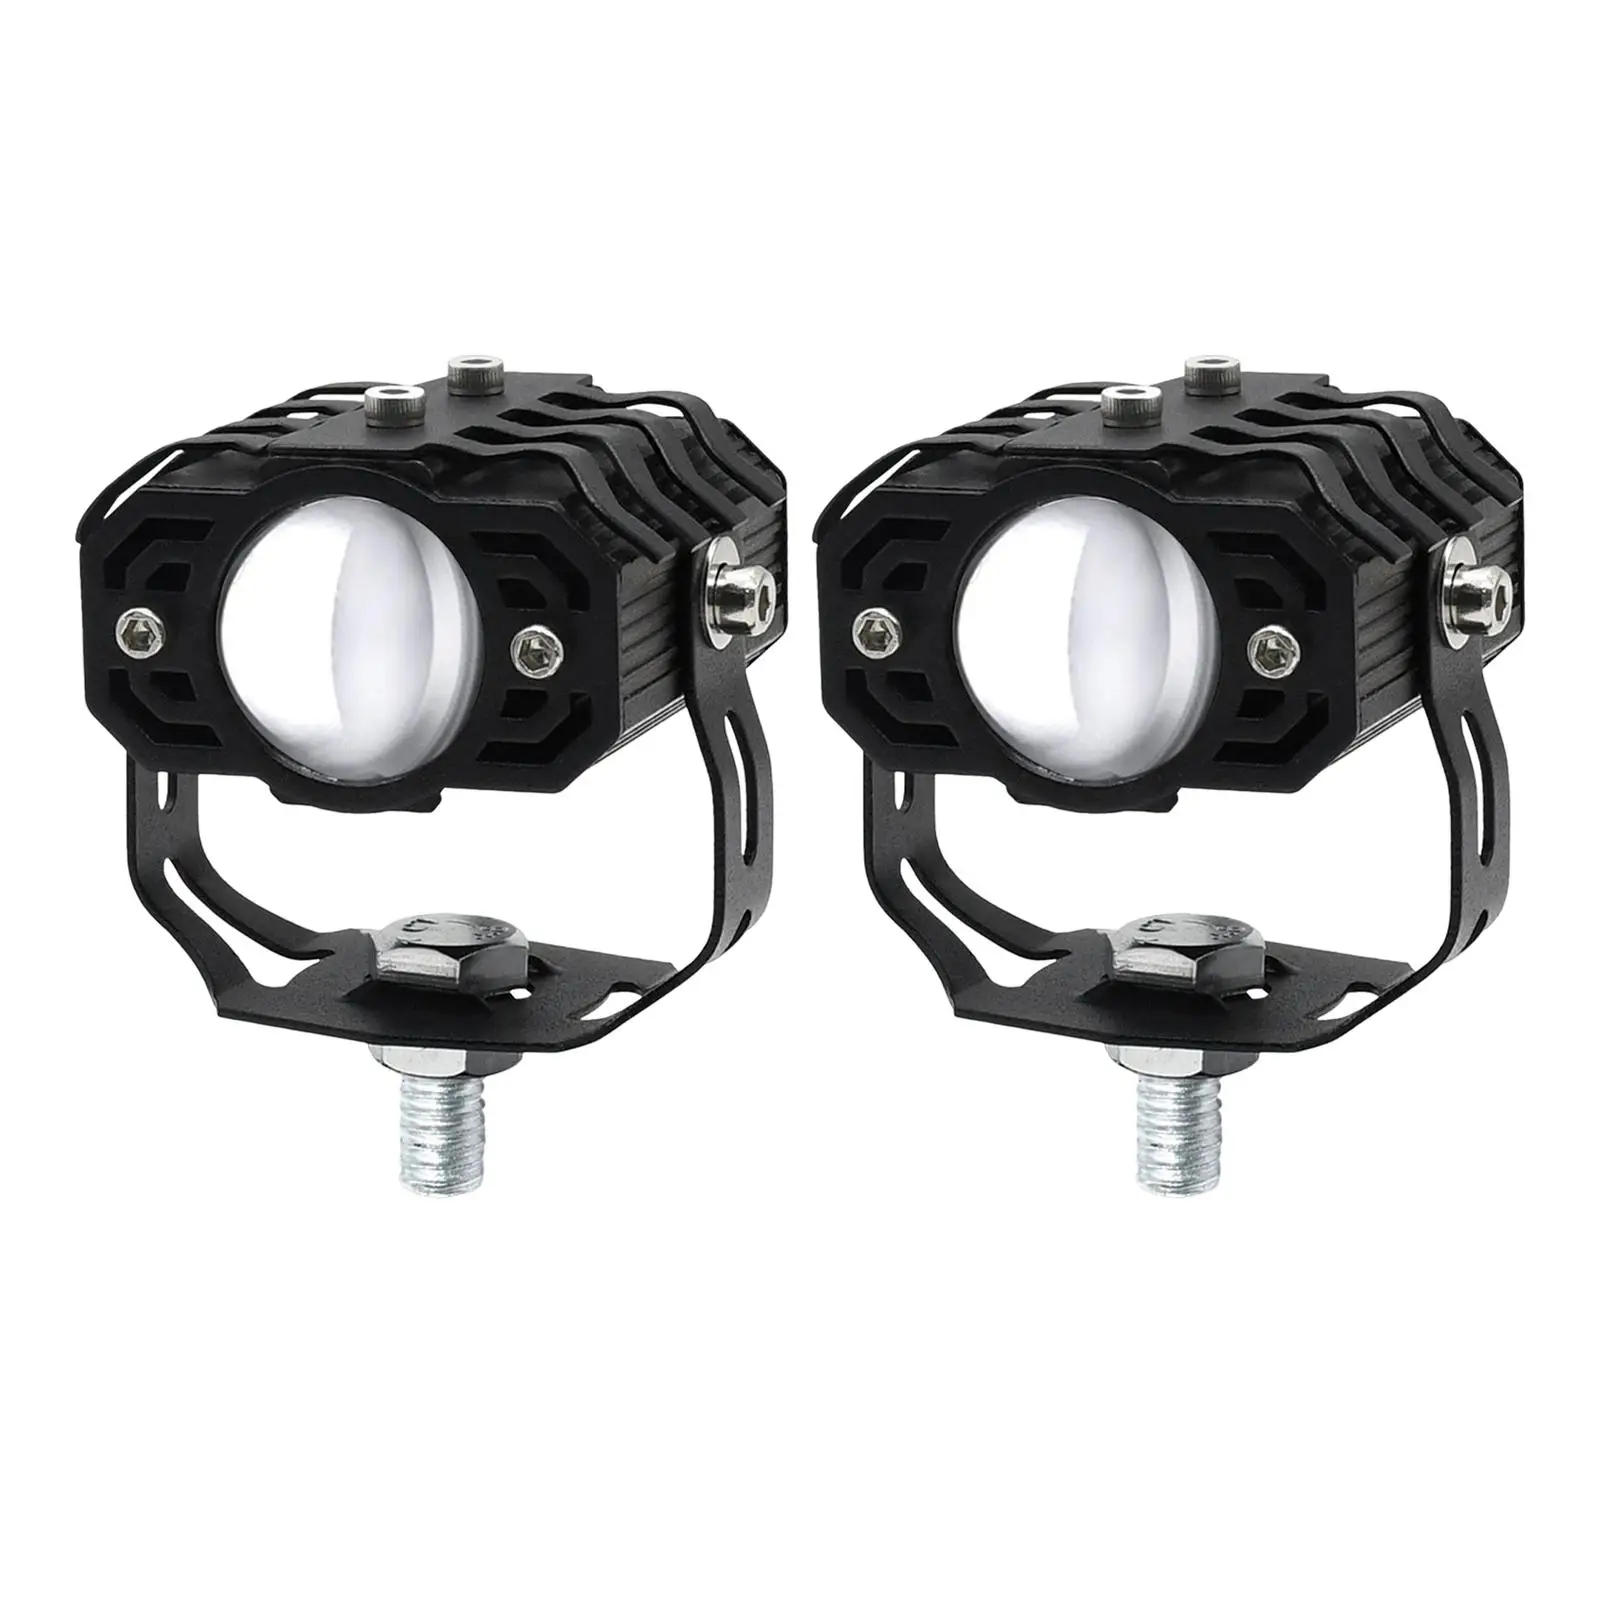 2Pcs Motorcycle Auxiliary Driving Lights Mini Spotlights Front for Boat